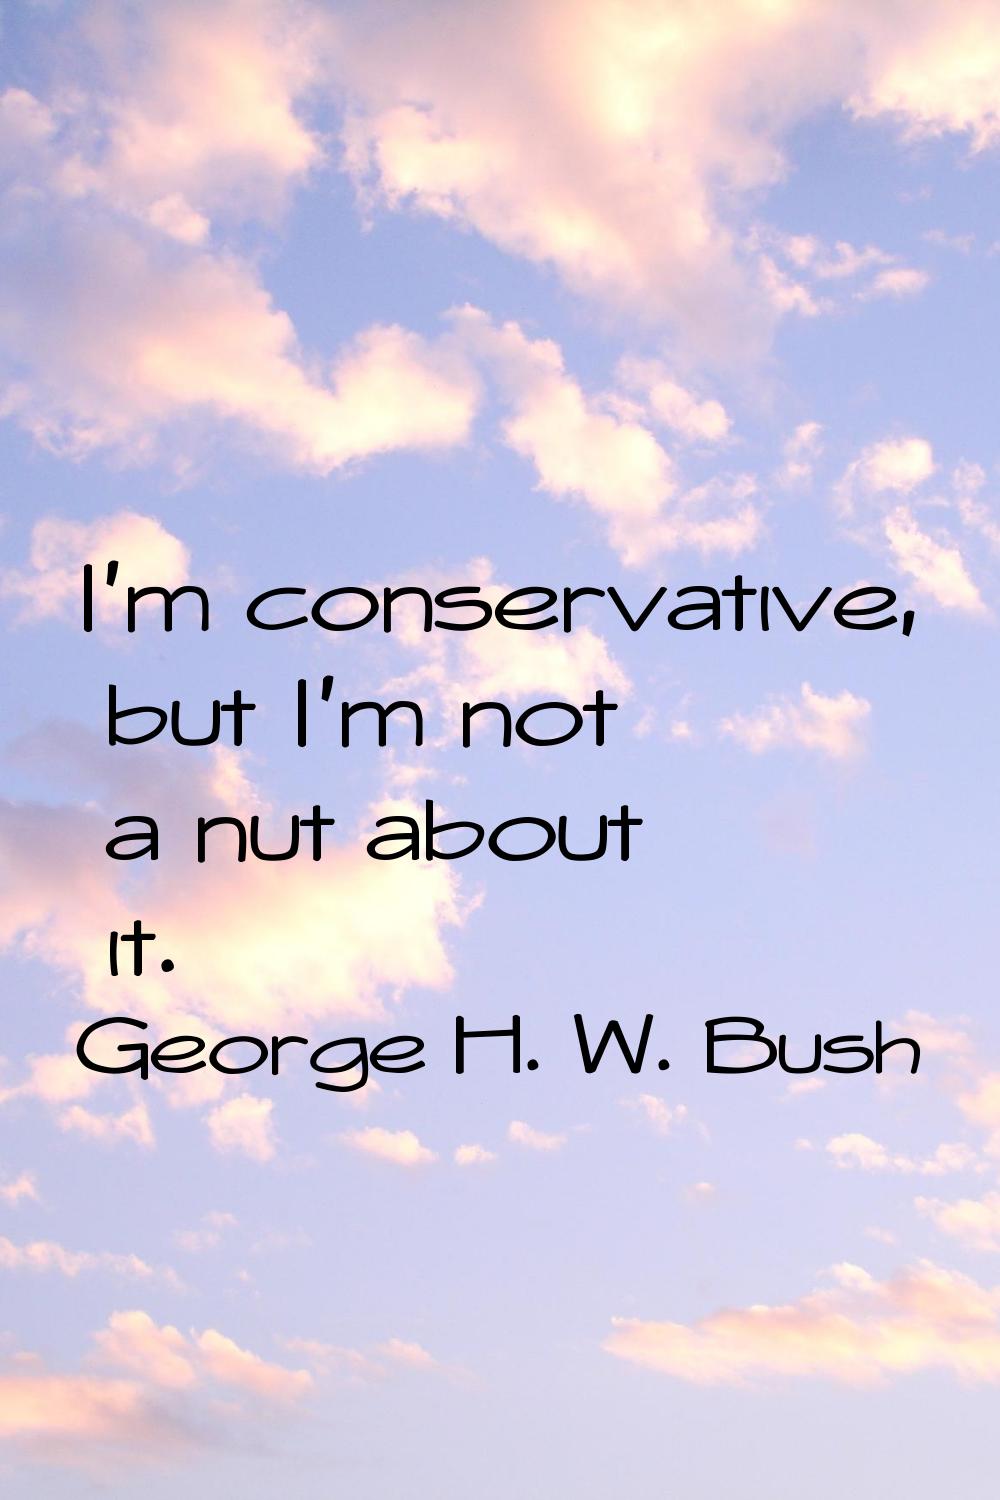 I'm conservative, but I'm not a nut about it.